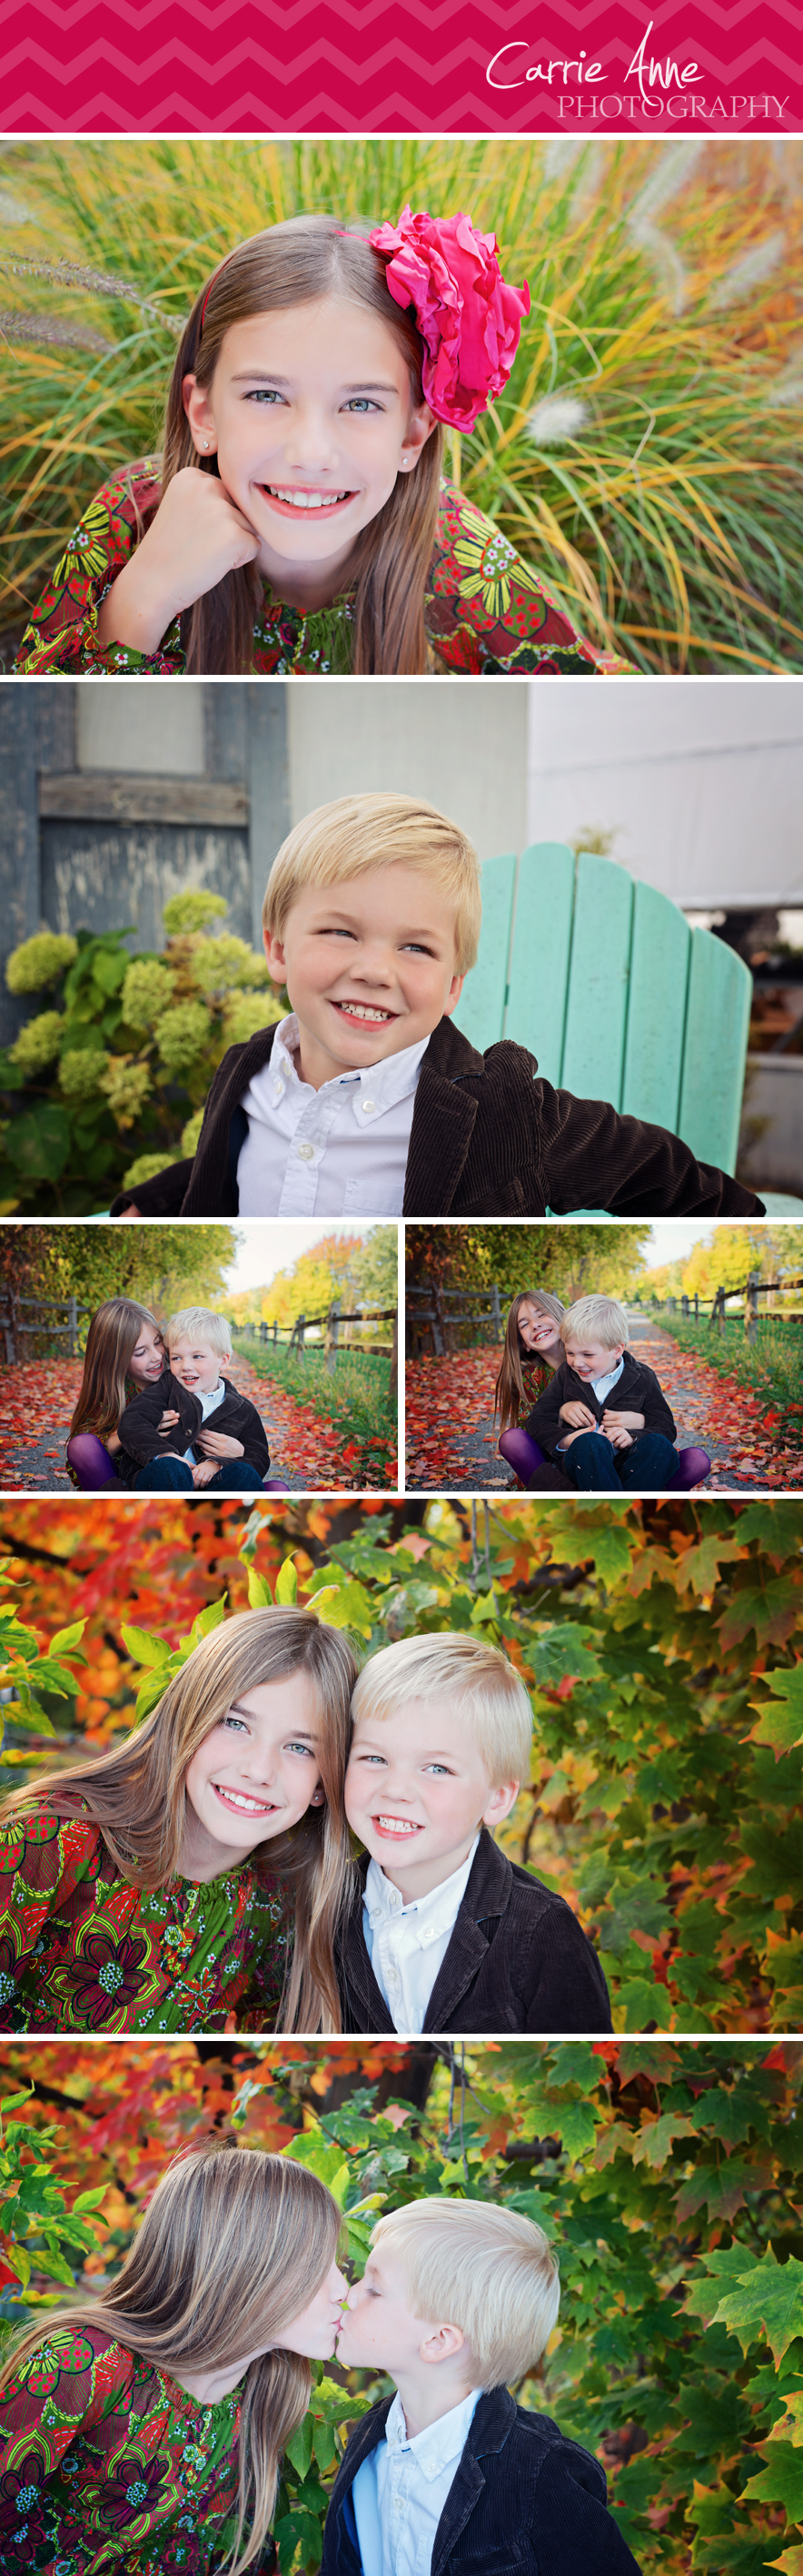 Unique and colorful family photography by Carrie Anne Photography